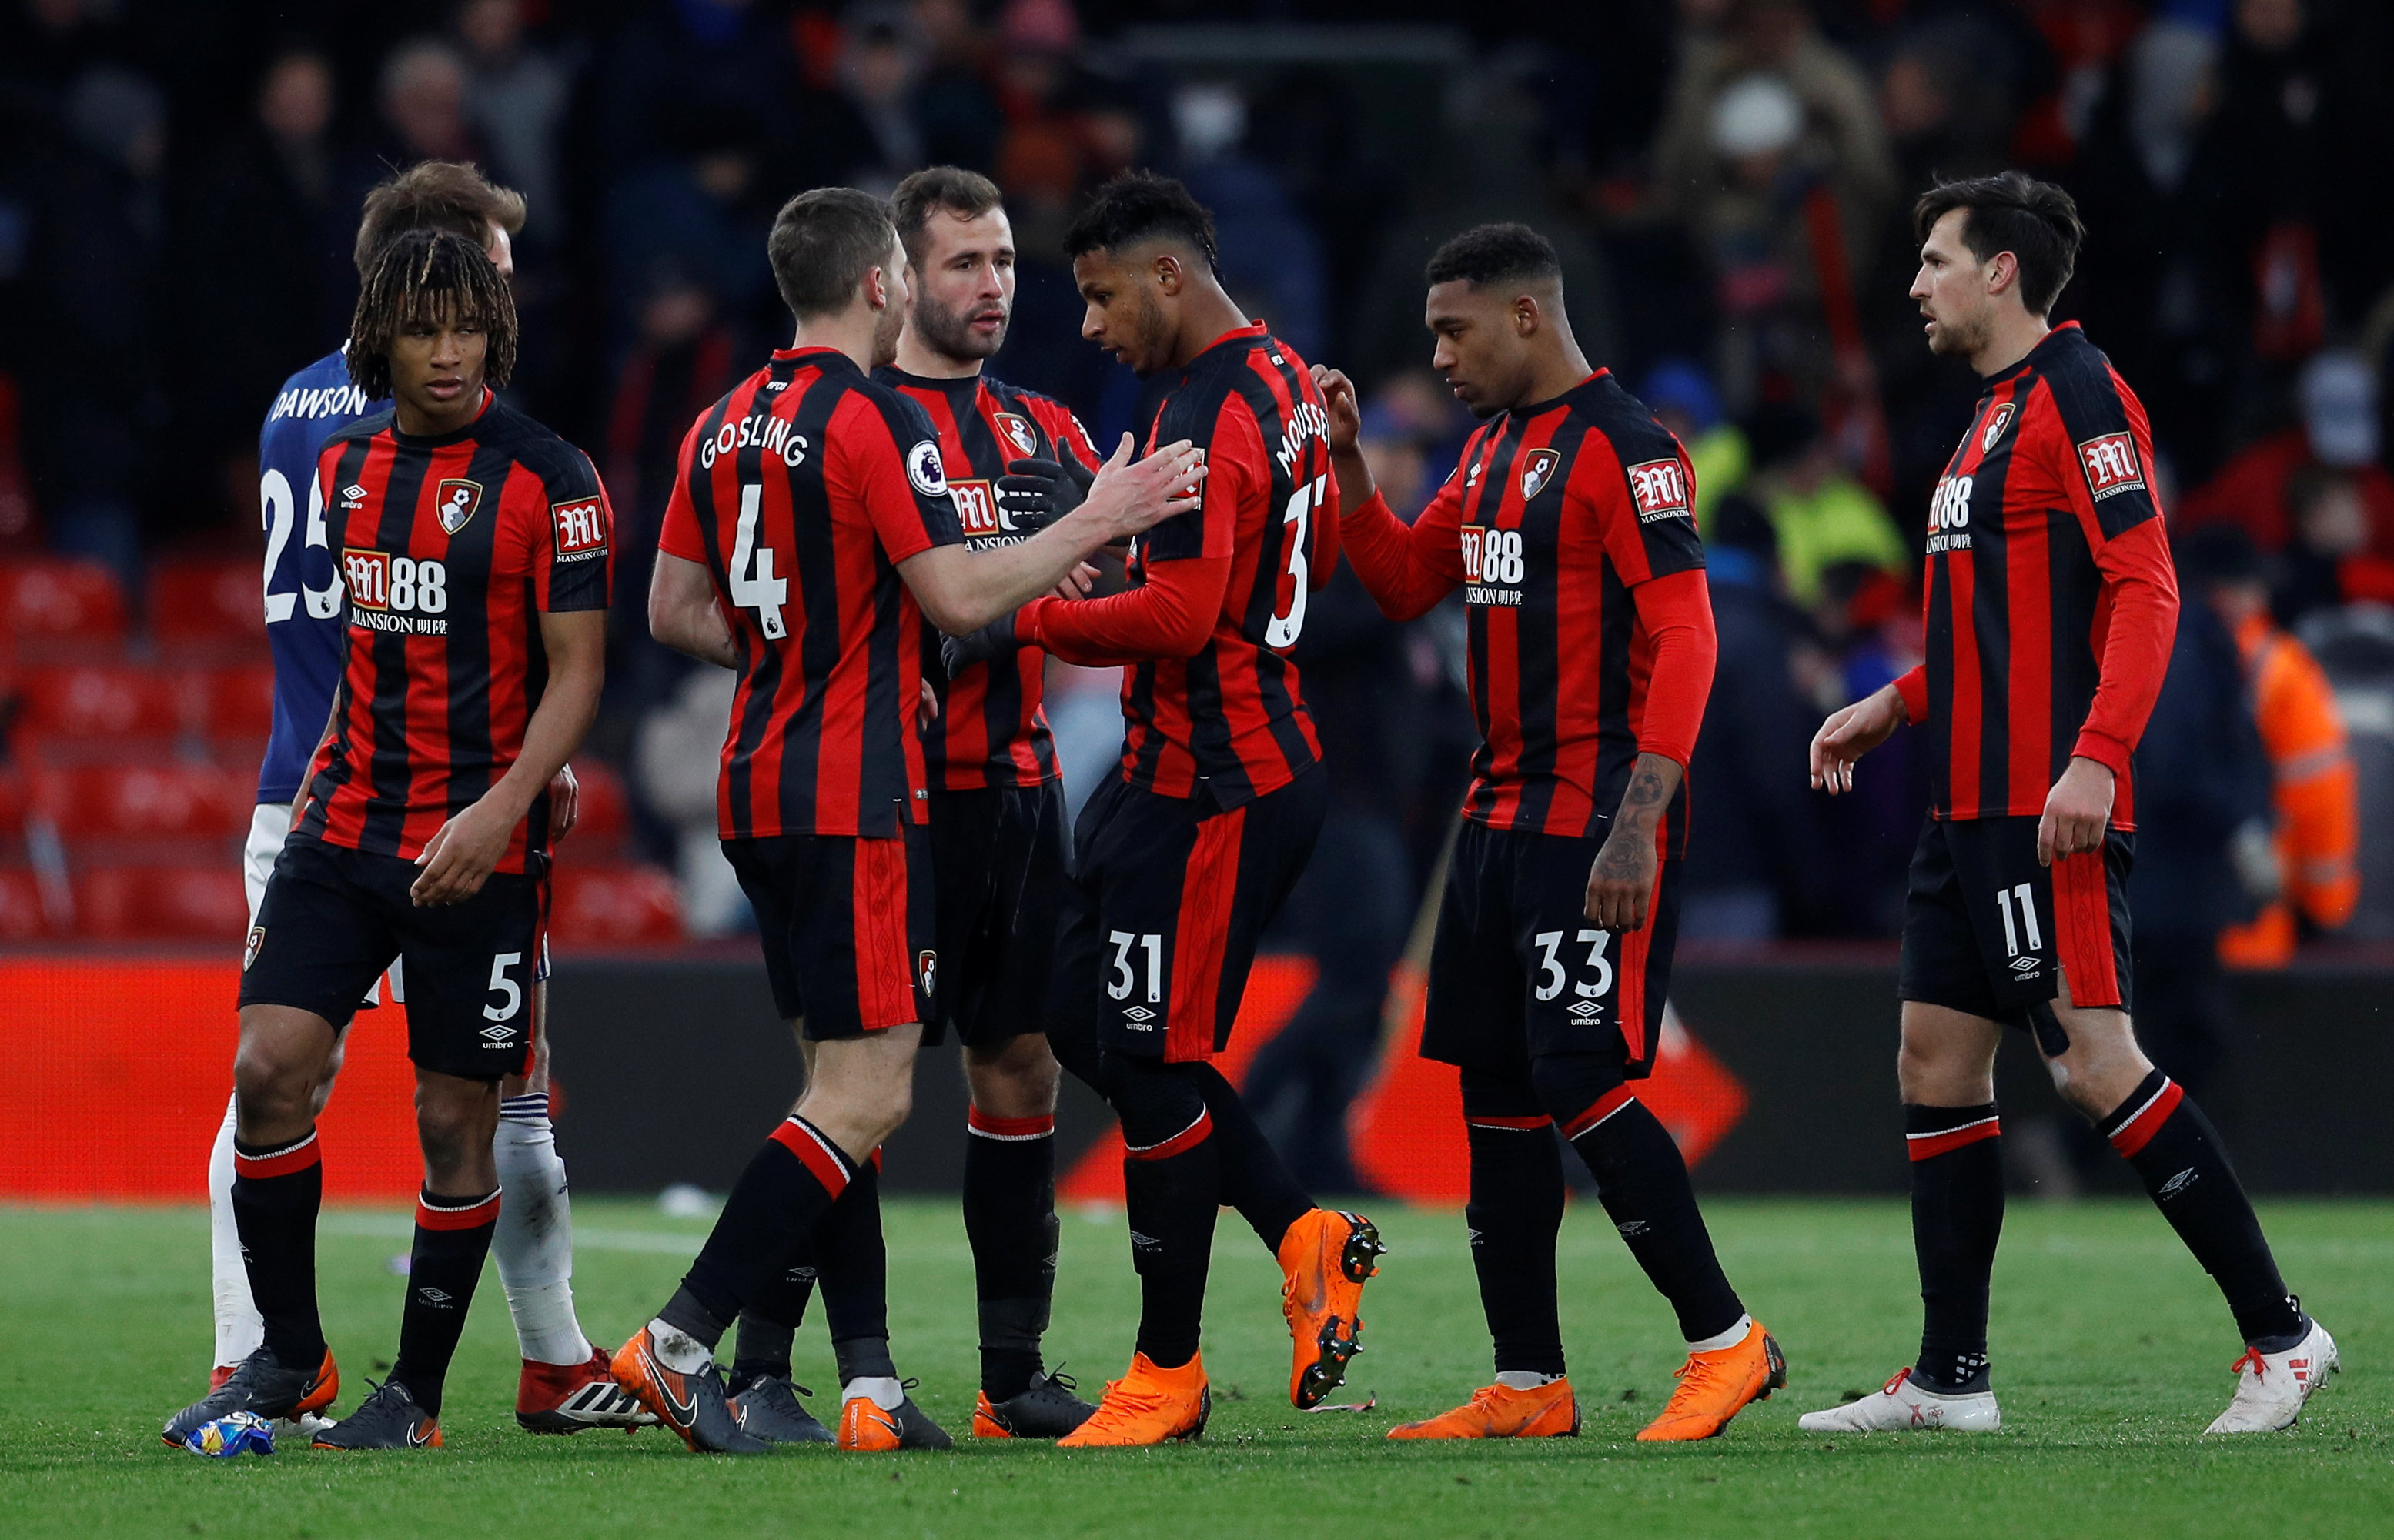 Football: Bournemouth rally to beat West Brom